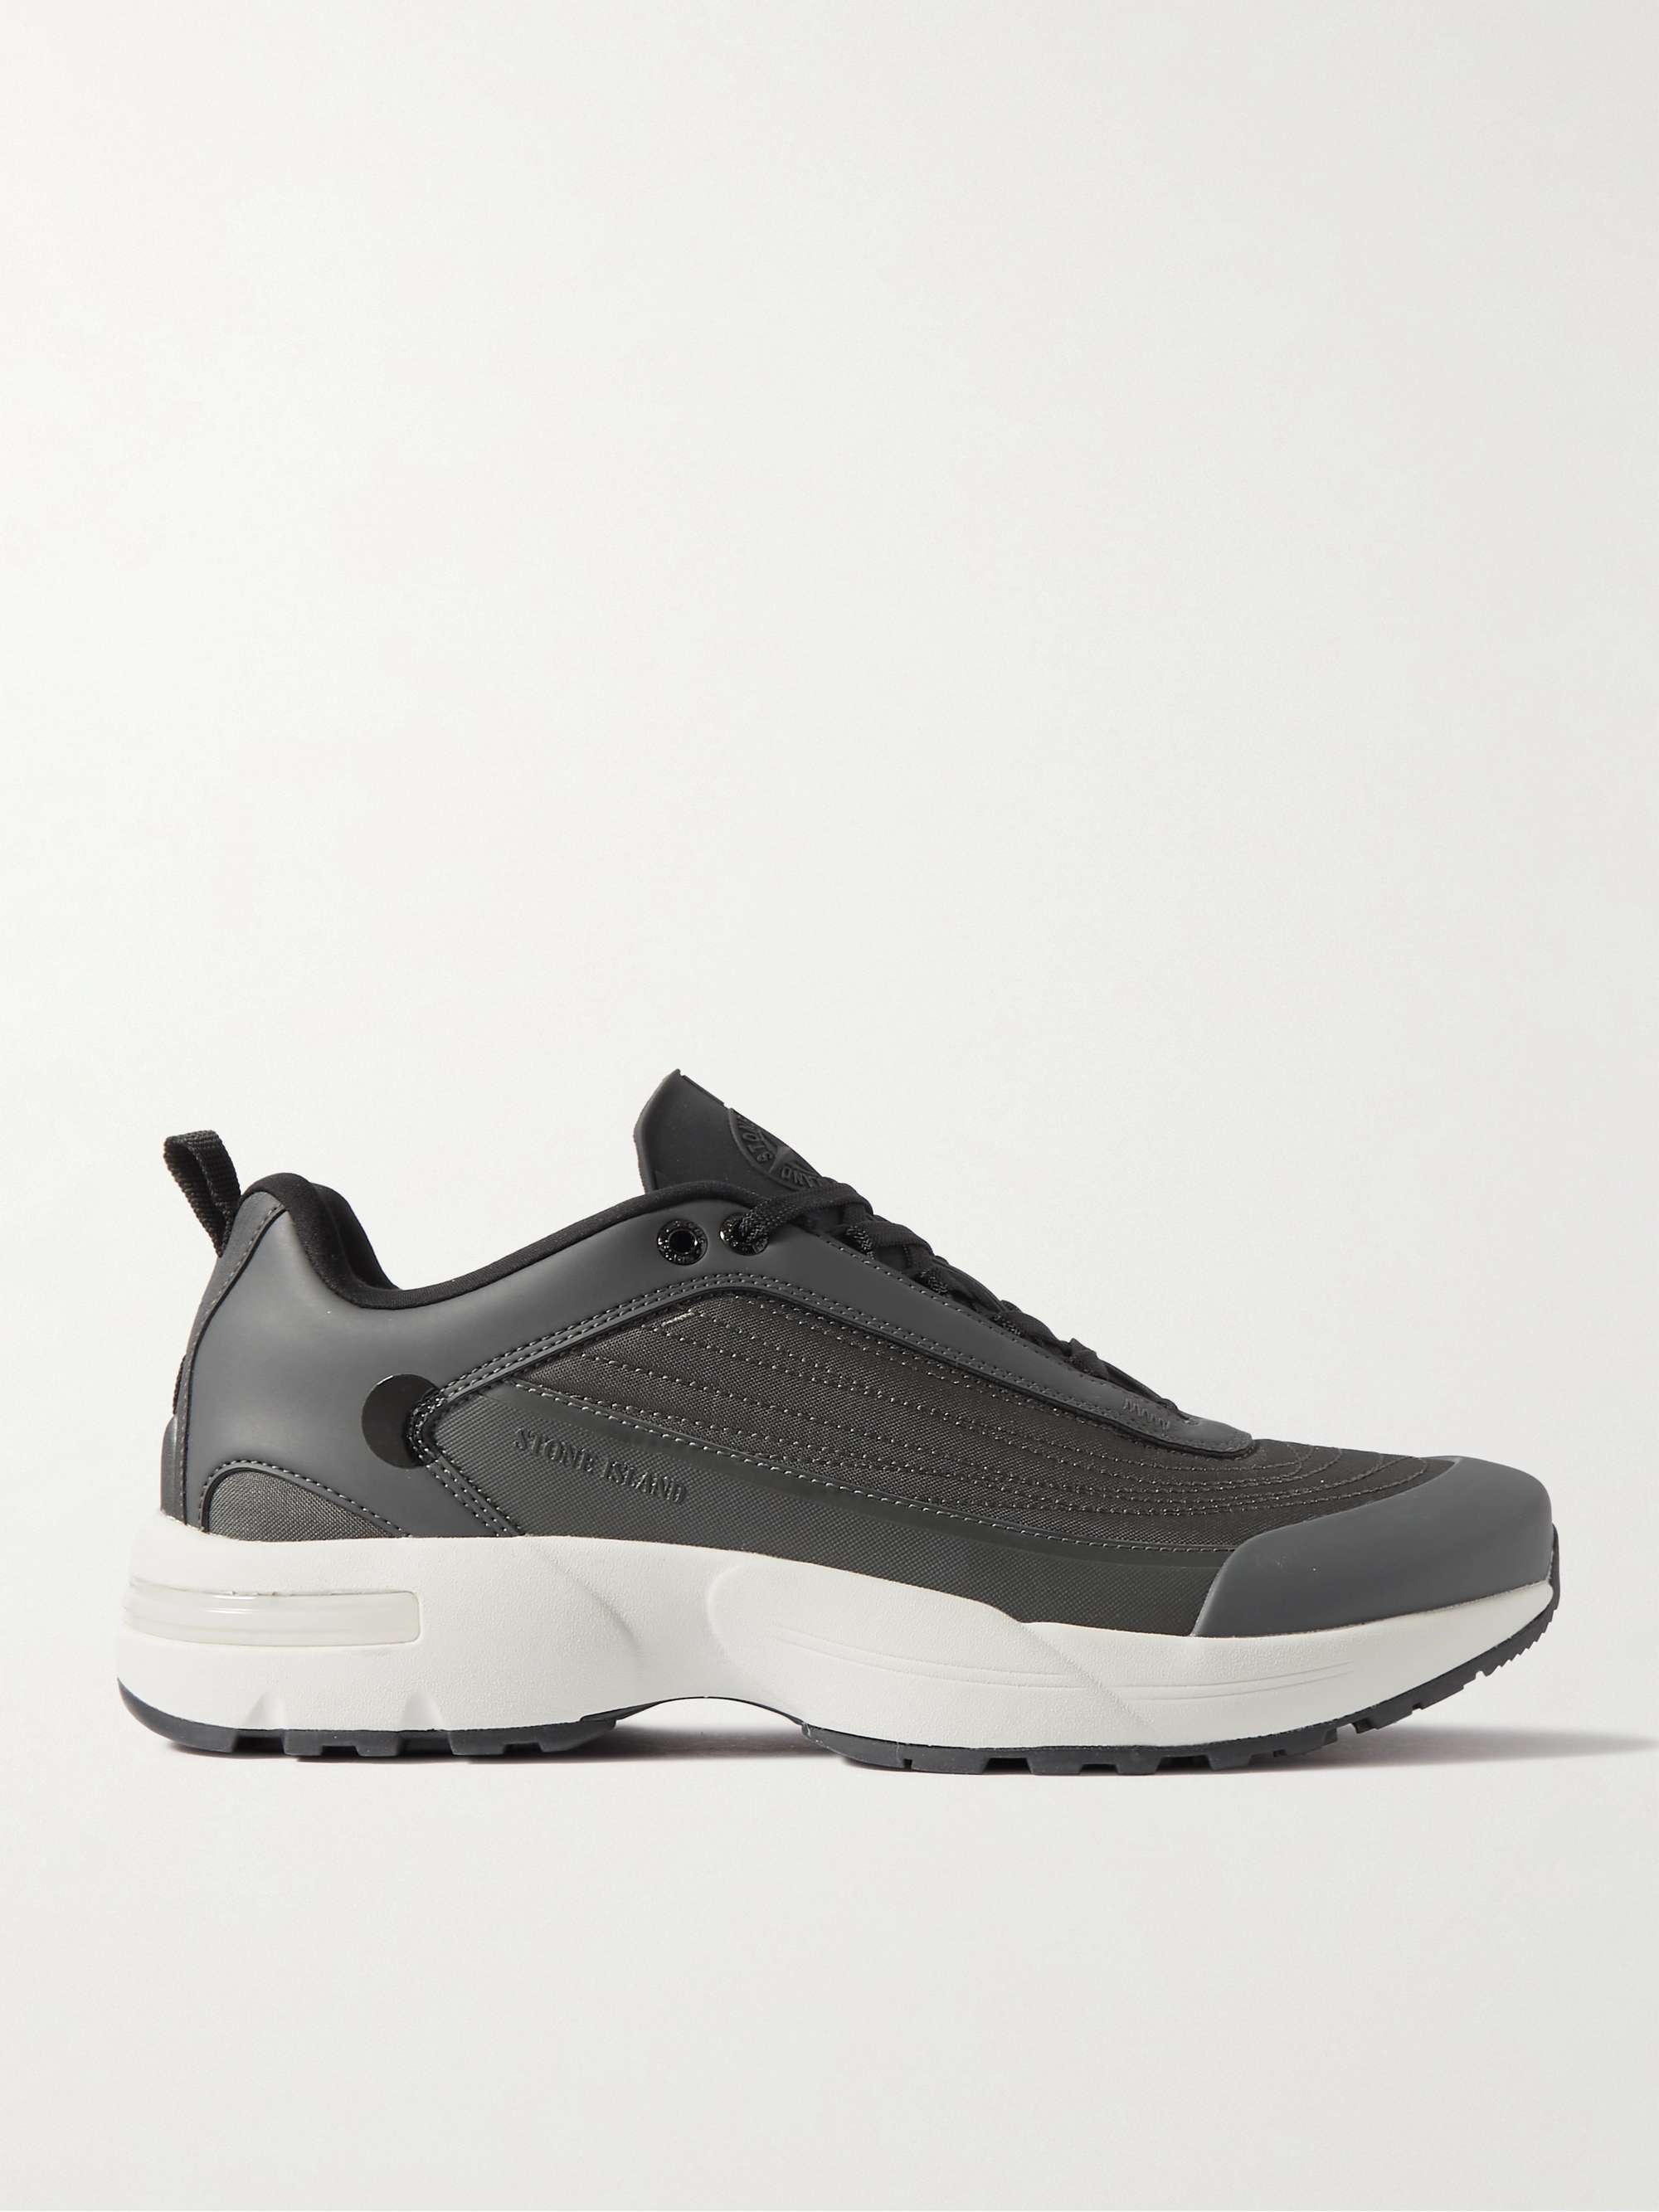 STONE ISLAND Grime Rubber-Trimmed Canvas Sneakers for Men | MR PORTER